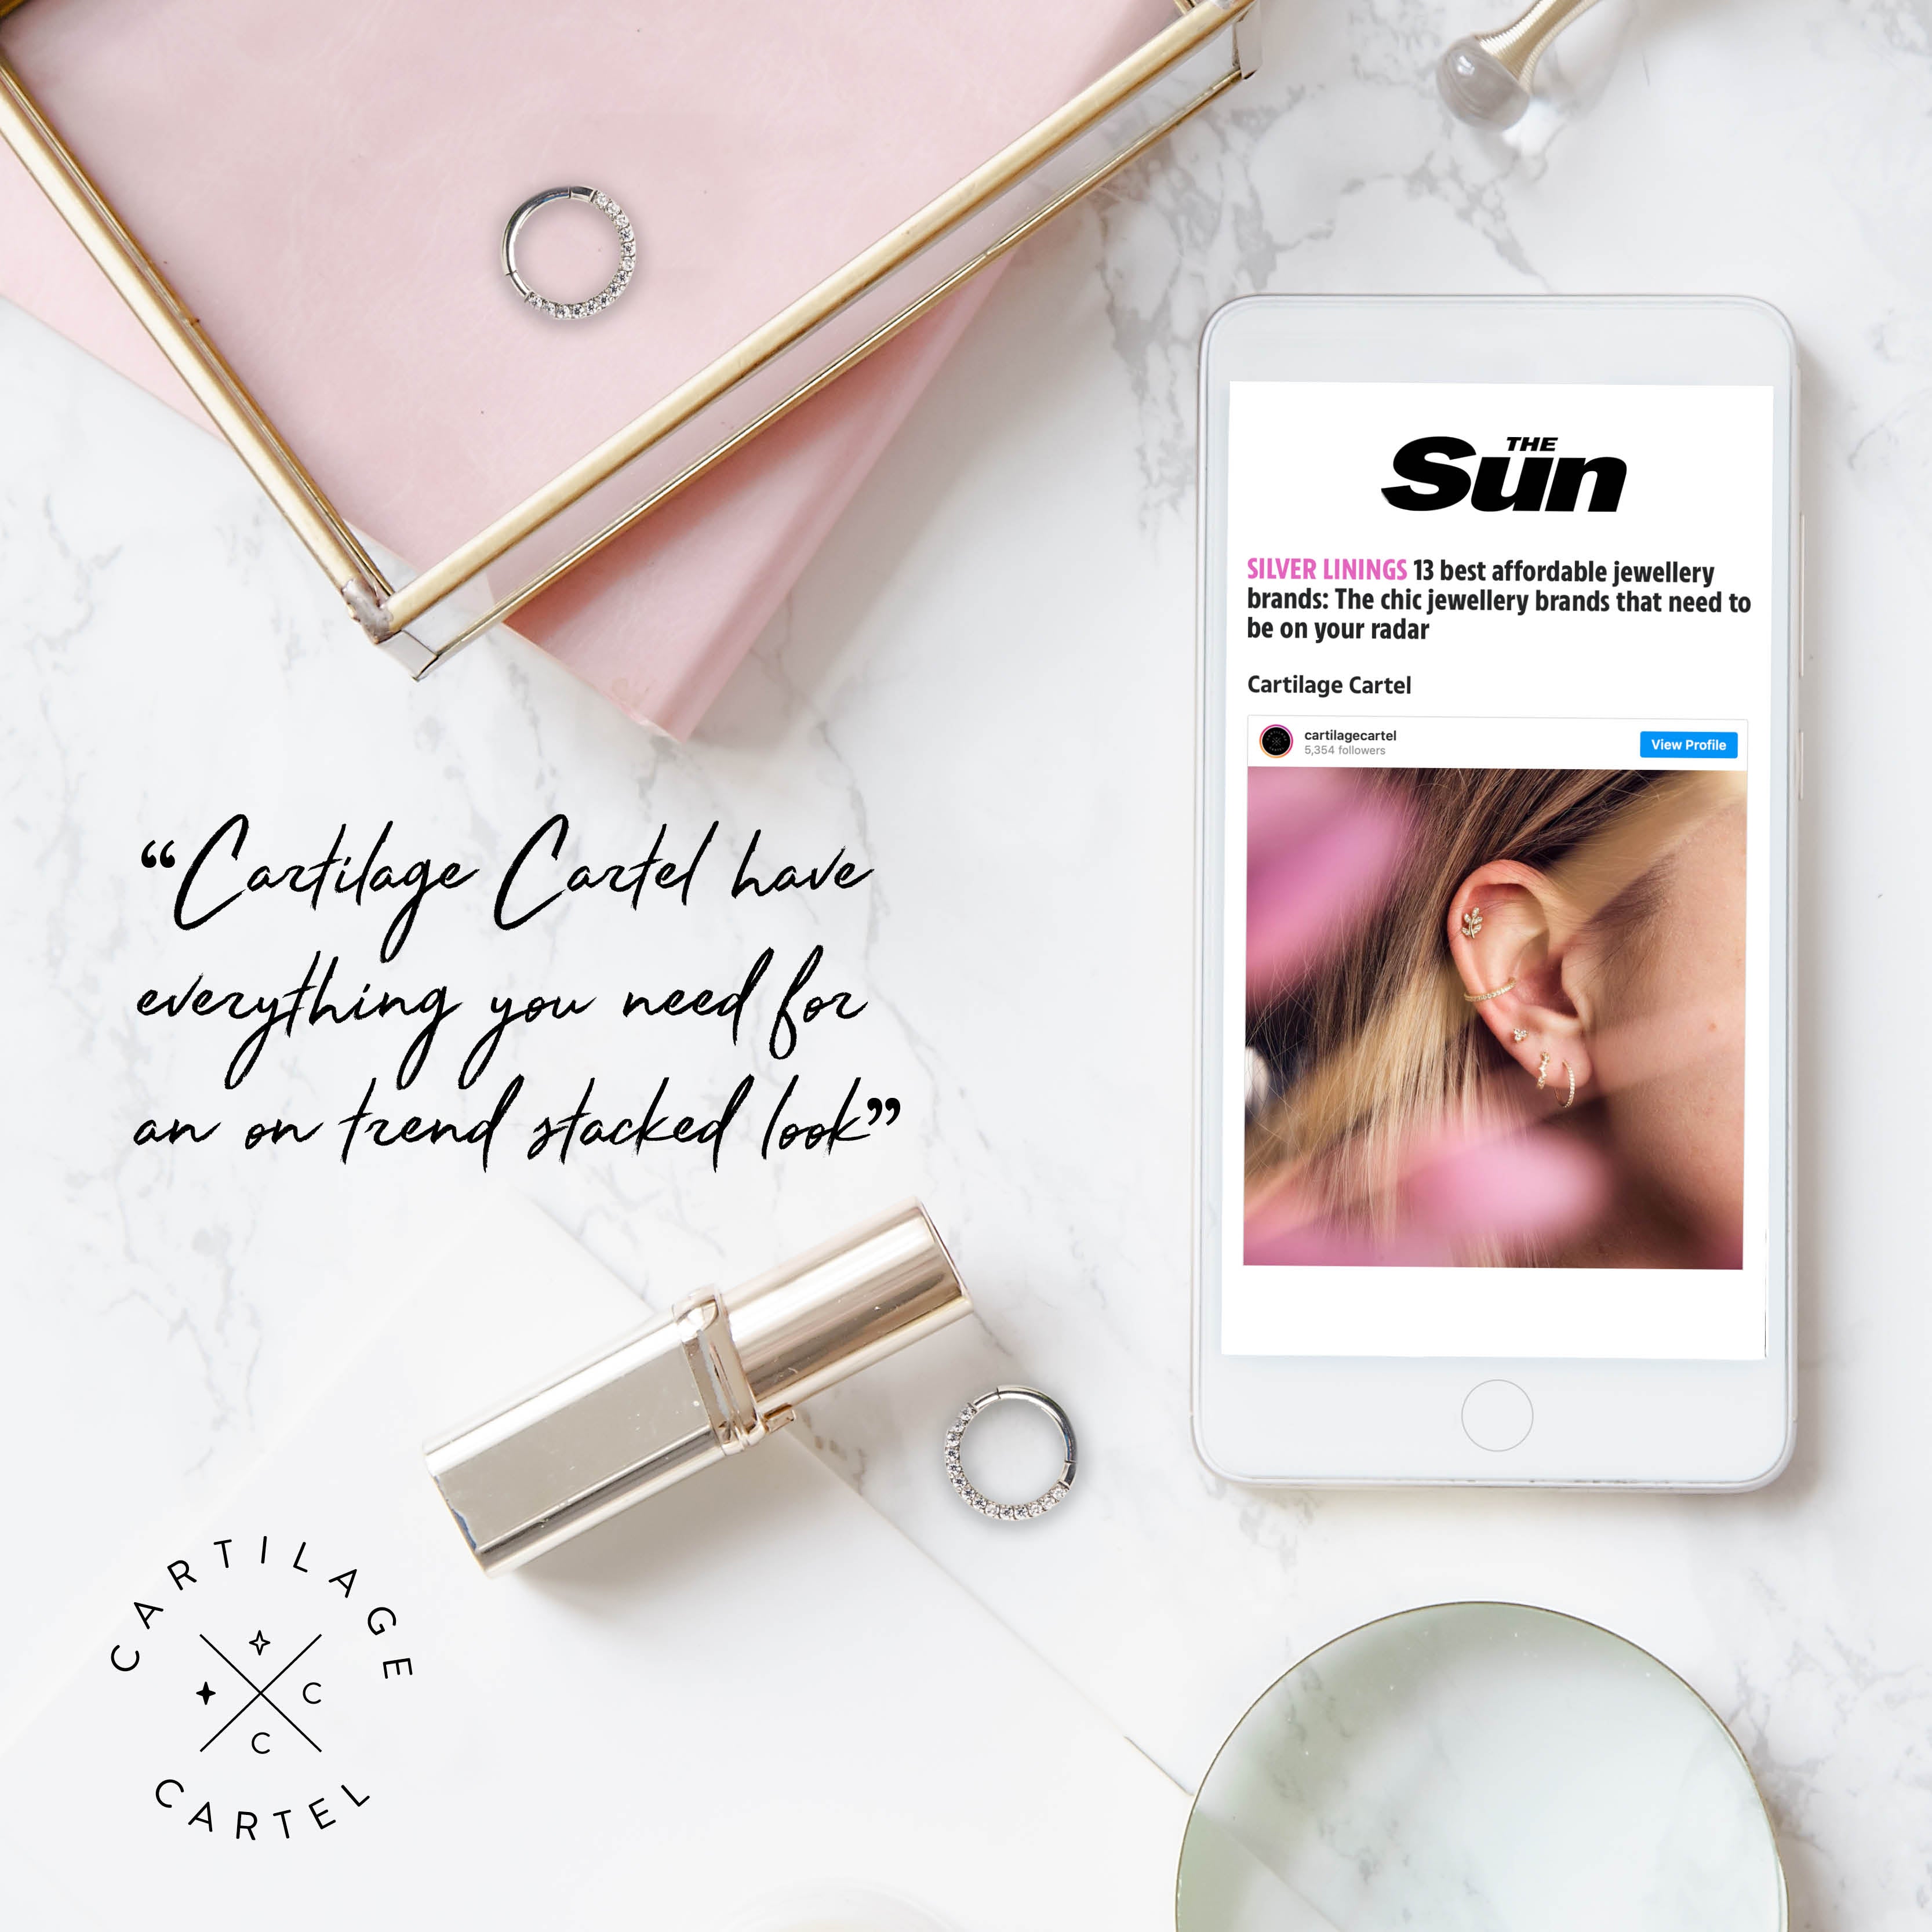 The Sun: The Chic Jewellery Brands That Need To Be On Your Radar